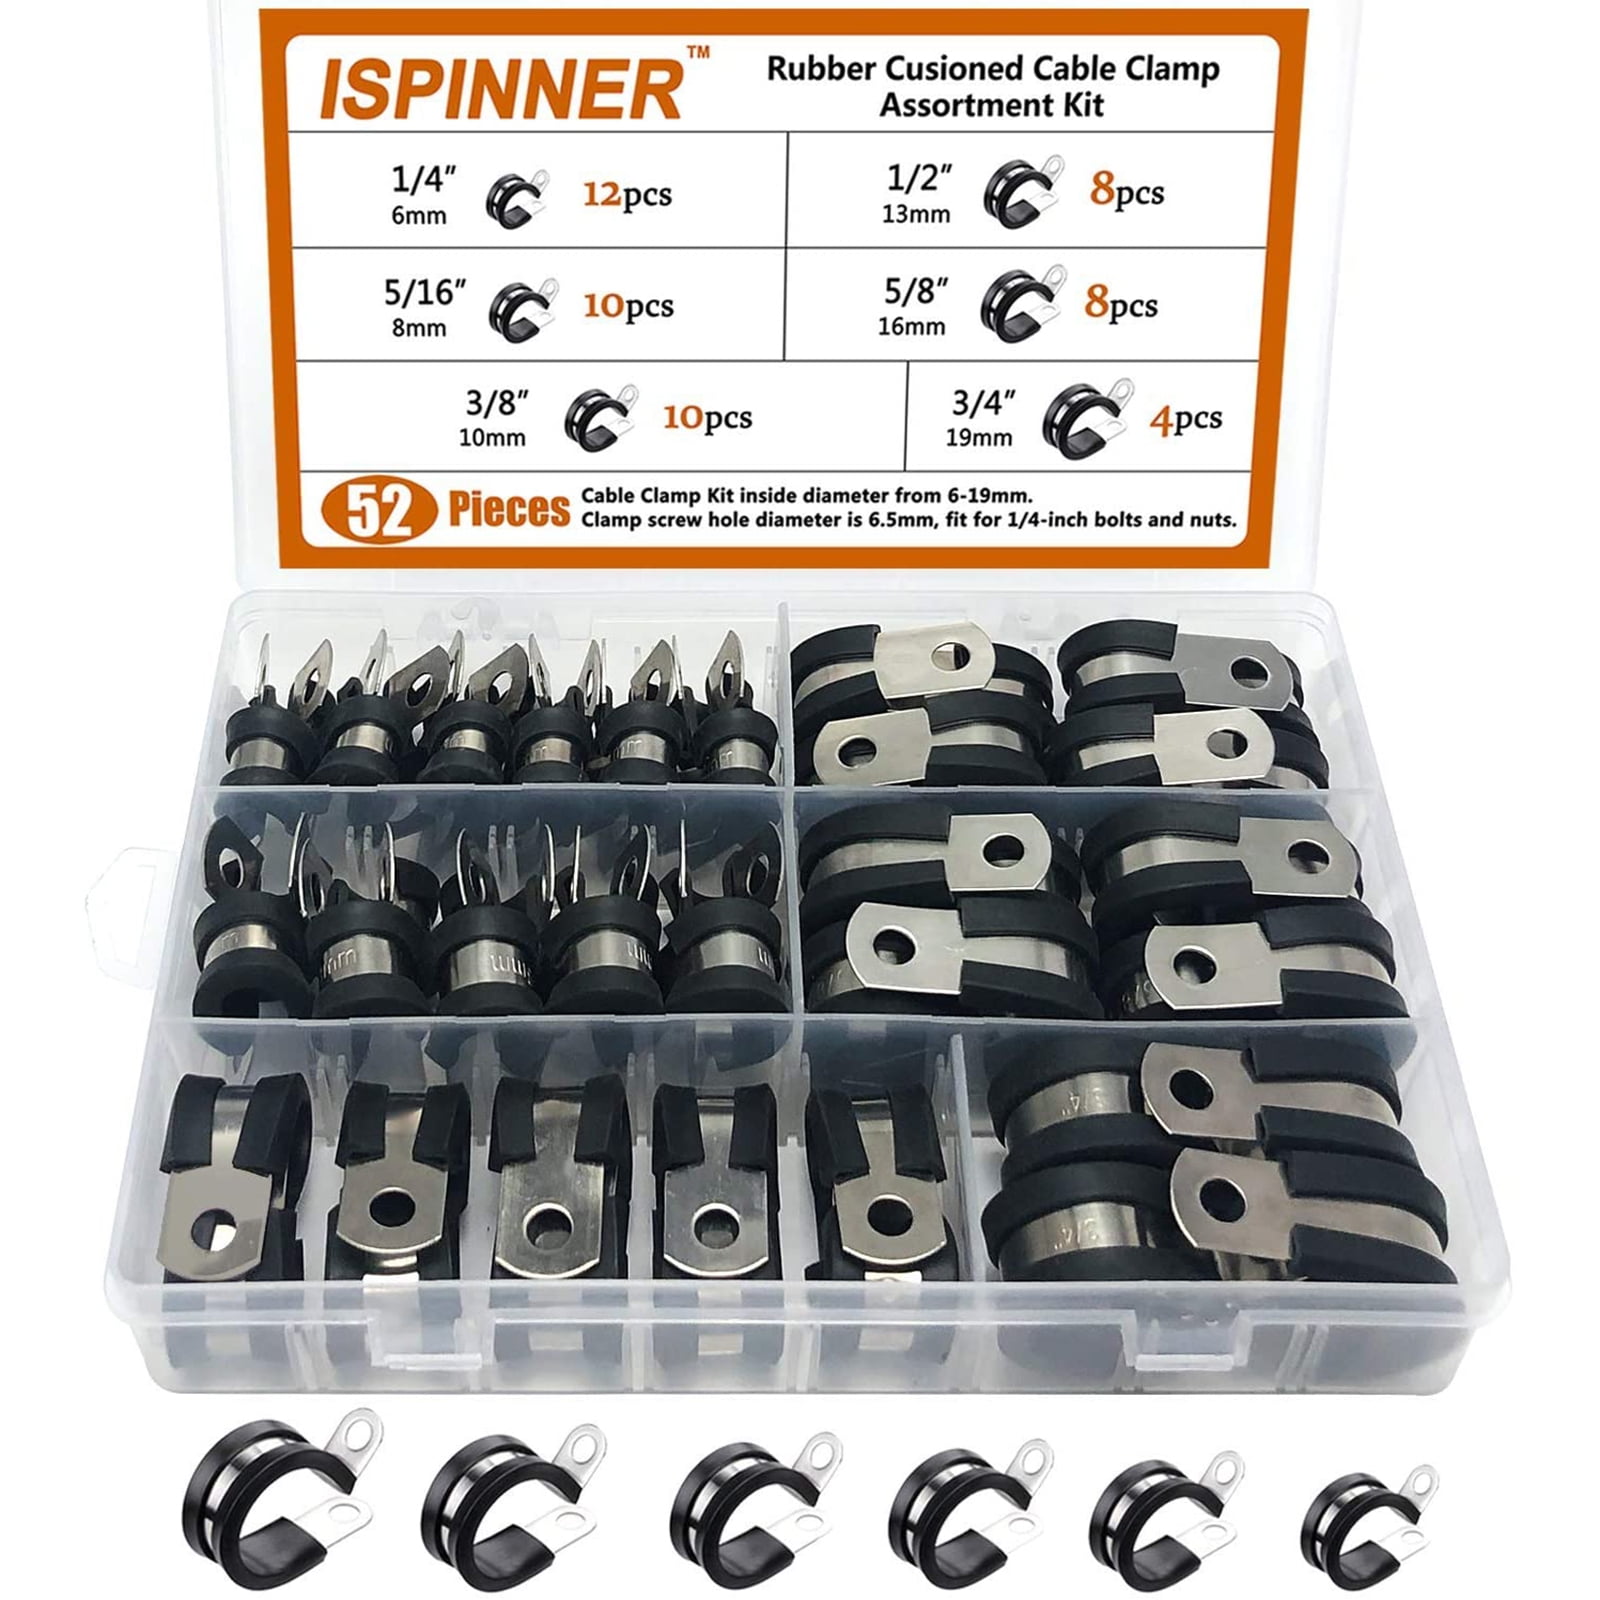 Pipe Clamp ISPINNER 12 Pack 1.375 Inch Rubber Cushioned Stainless Steel Cable Clamp Hose Clamp 1-3/8 Inch